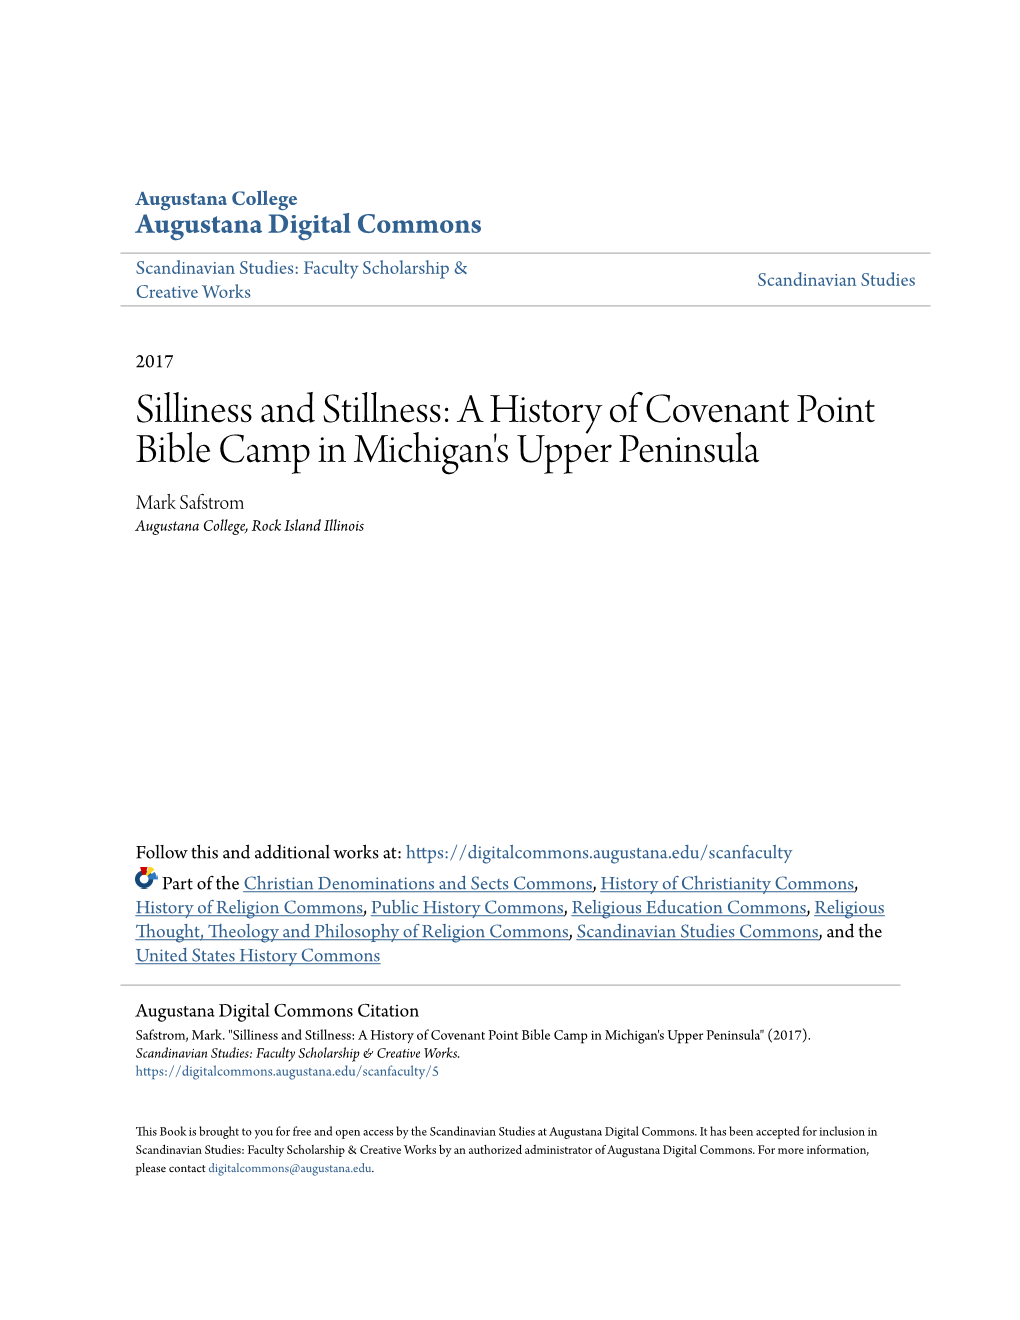 A History of Covenant Point Bible Camp in Michigan's Upper Peninsula Mark Safstrom Augustana College, Rock Island Illinois